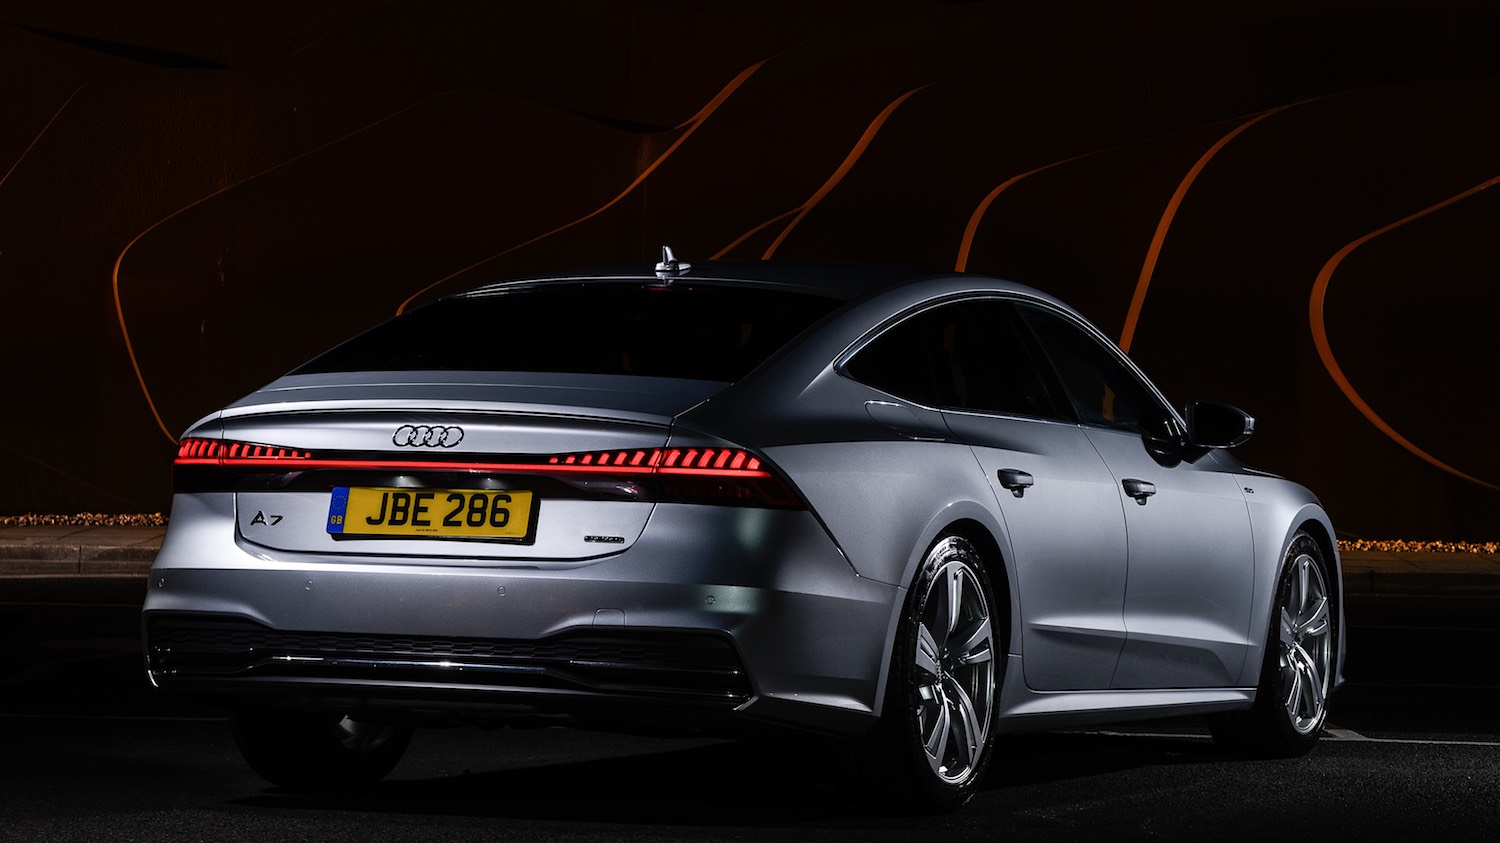 Neil Lyndon motoring correspondent reviews the latest Audi A7 for Drive 23